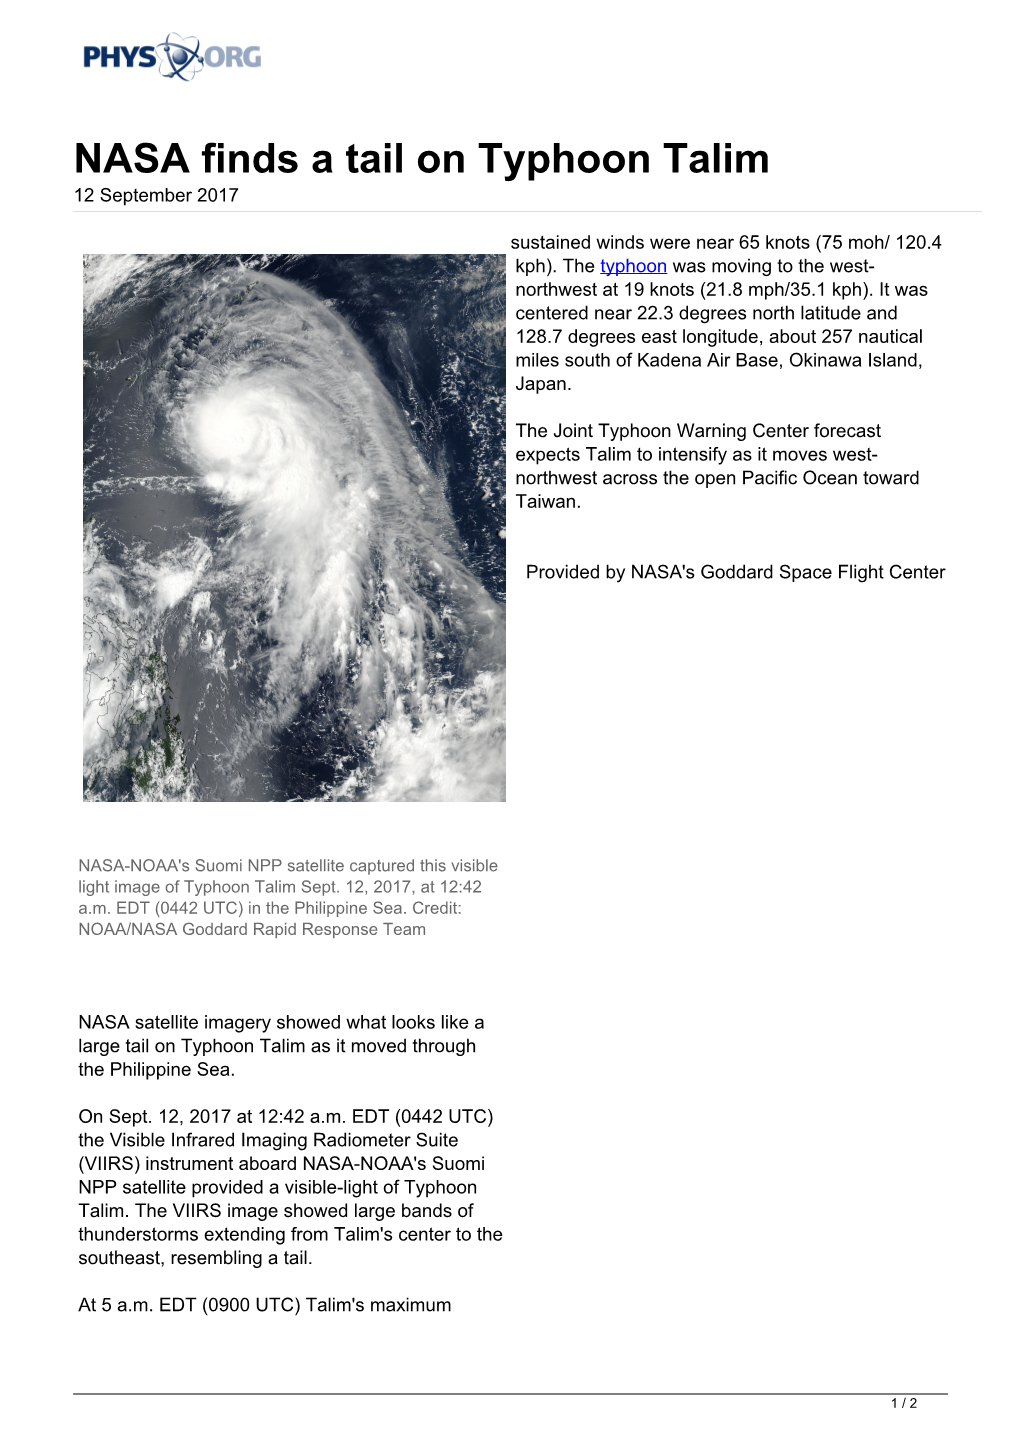 NASA Finds a Tail on Typhoon Talim 12 September 2017